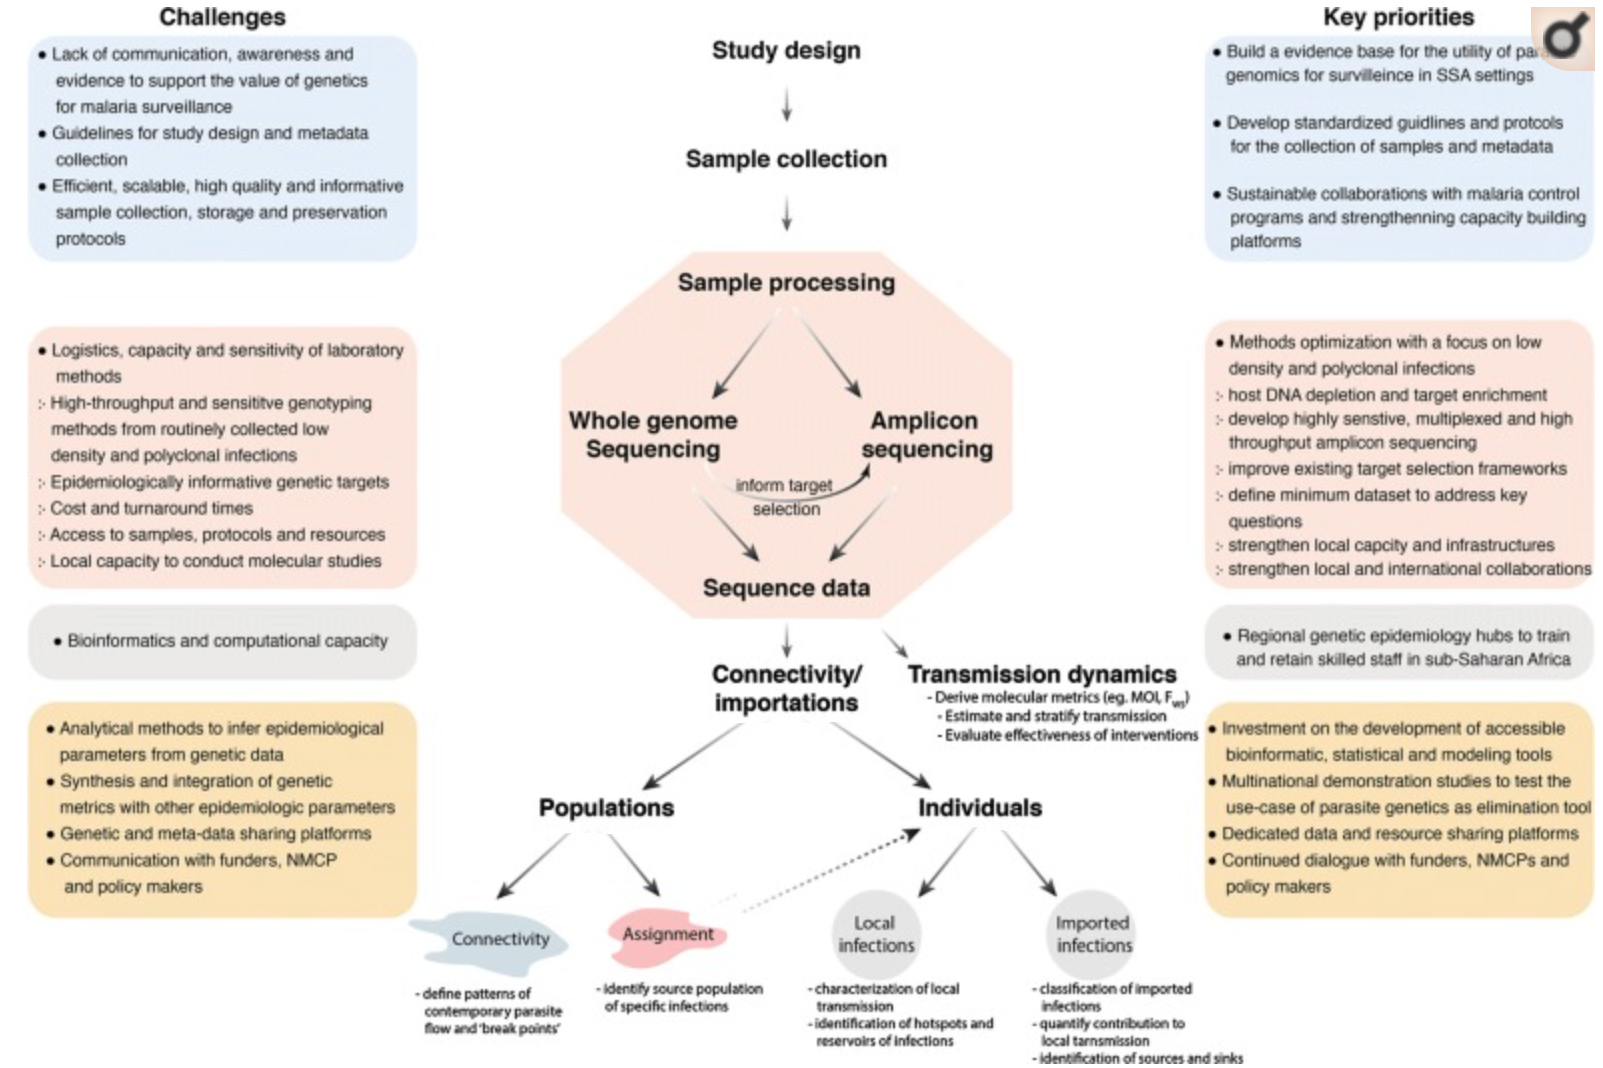 Challenges and key priorities of genomic epidemiology in sub-Saharan Africa